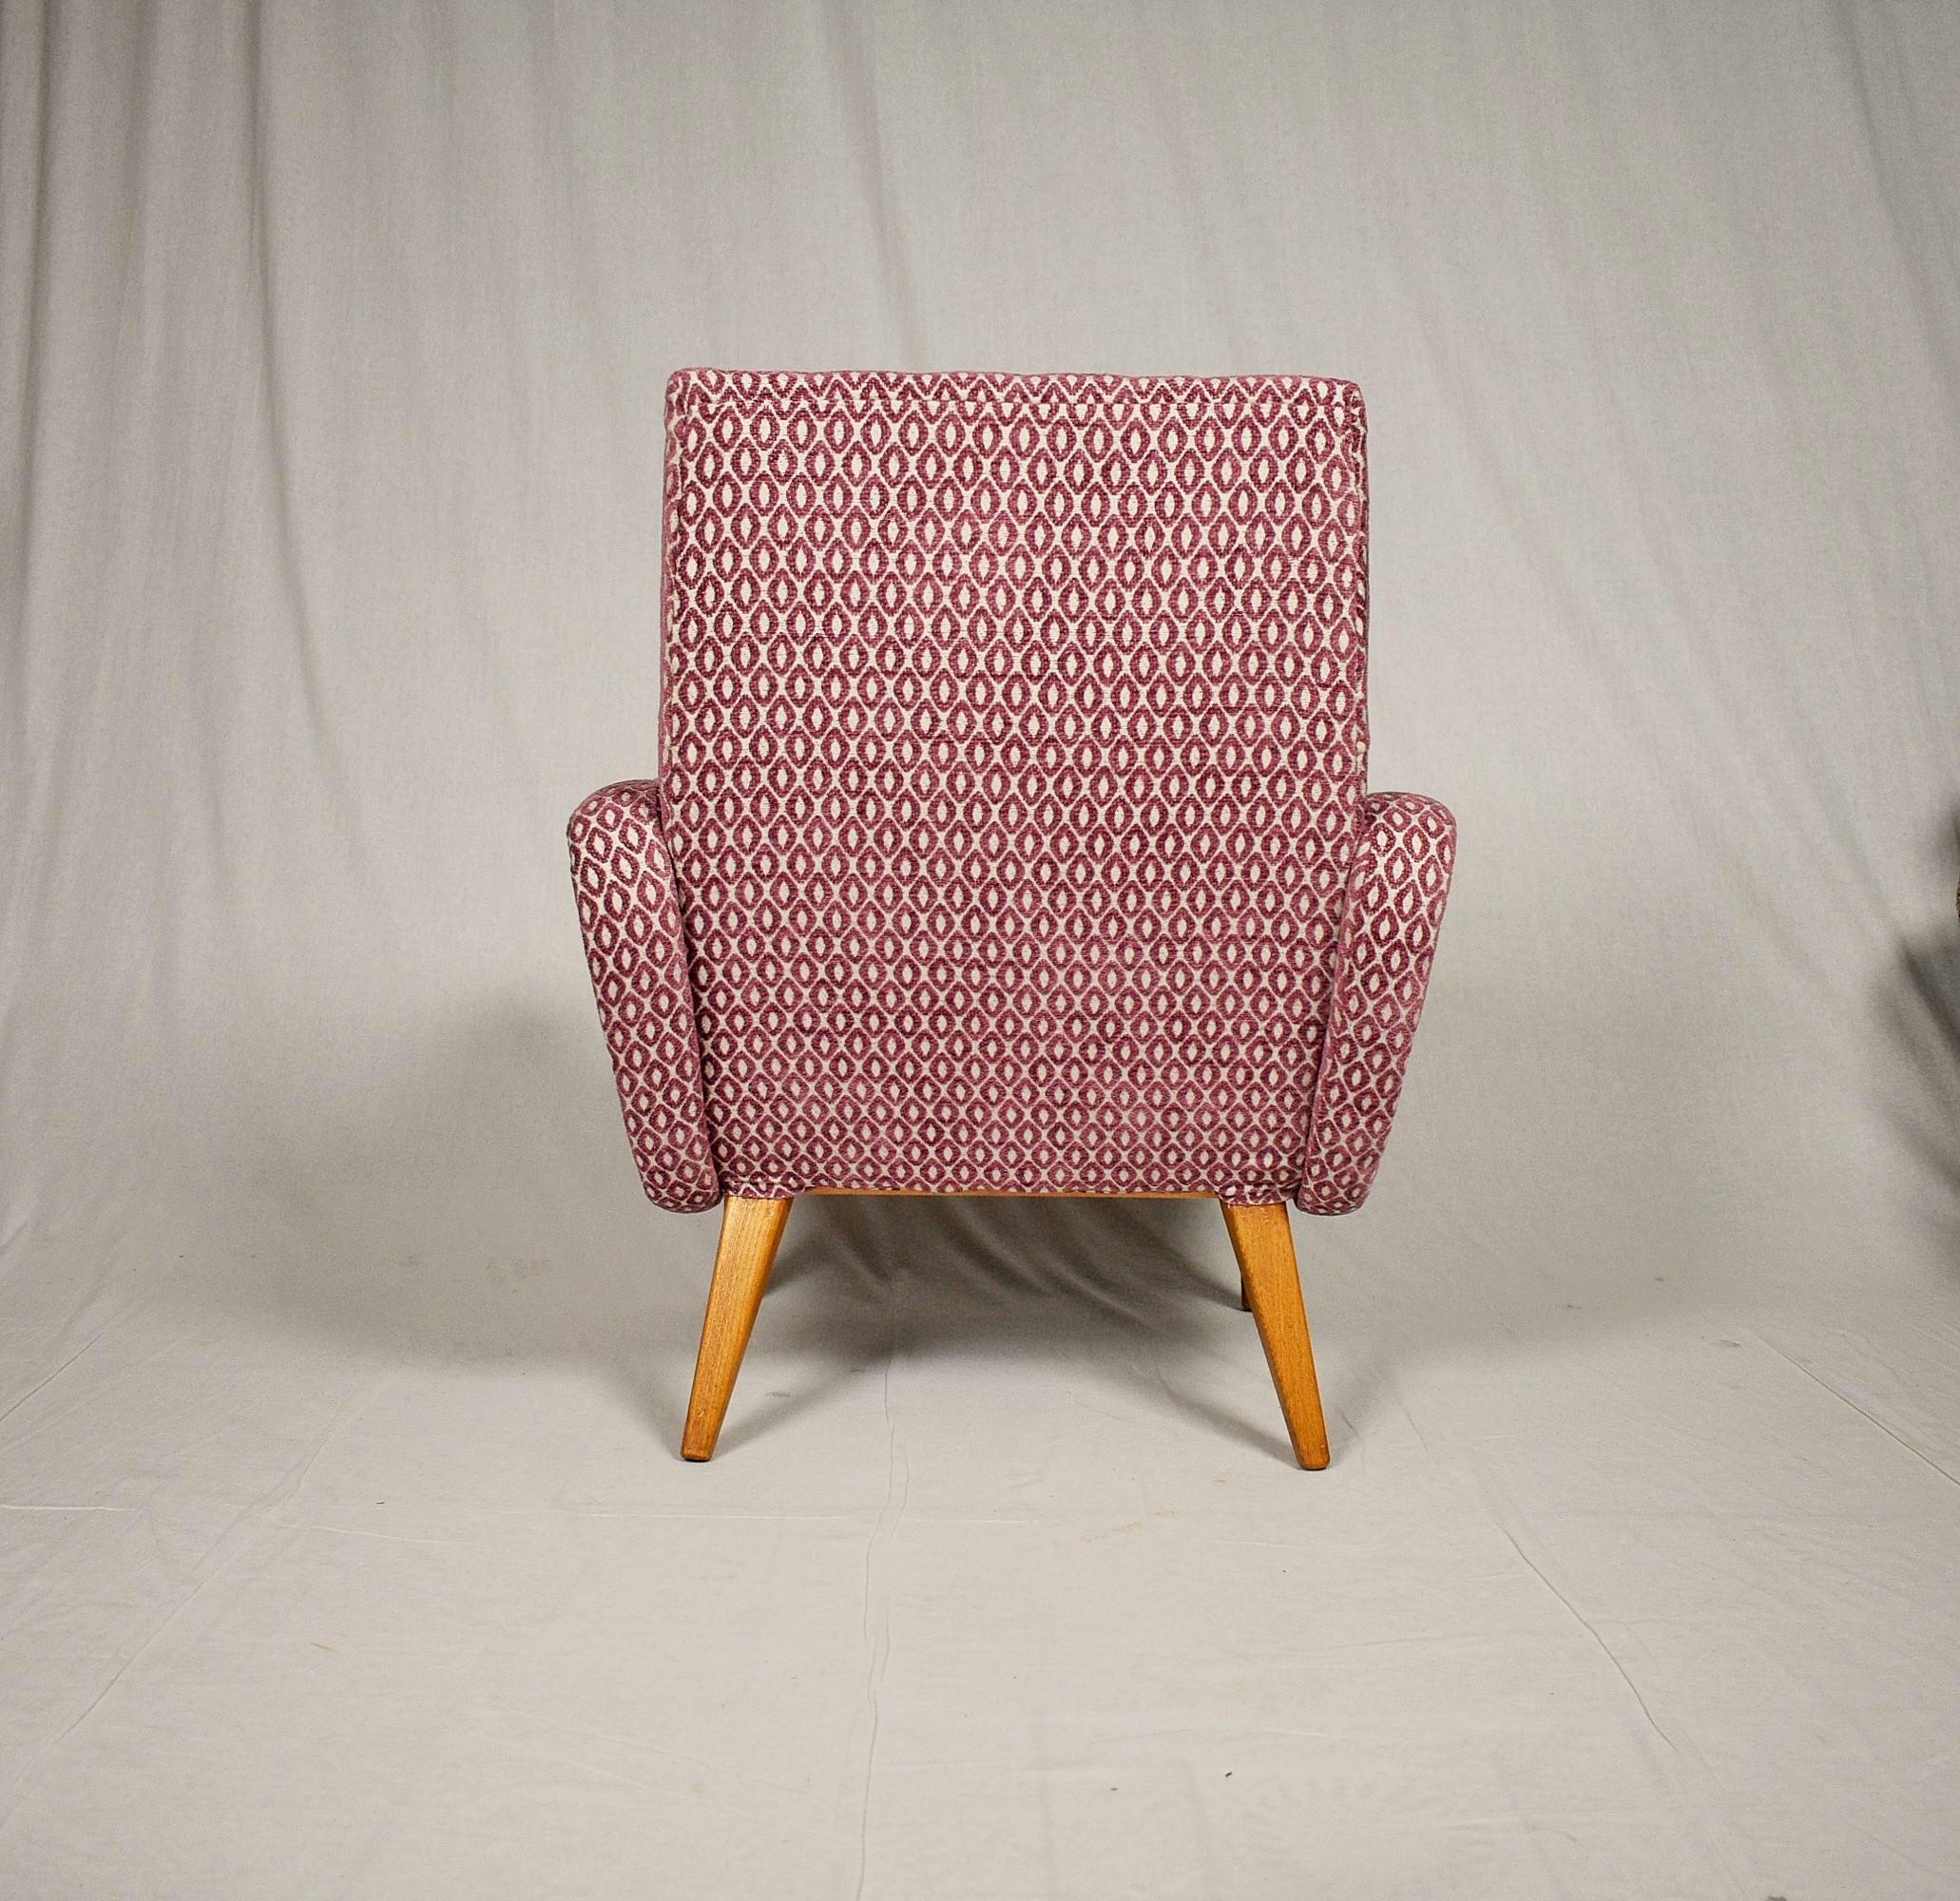 'Lady Chair' in Style of Marco Zanuso, 1960s For Sale 2